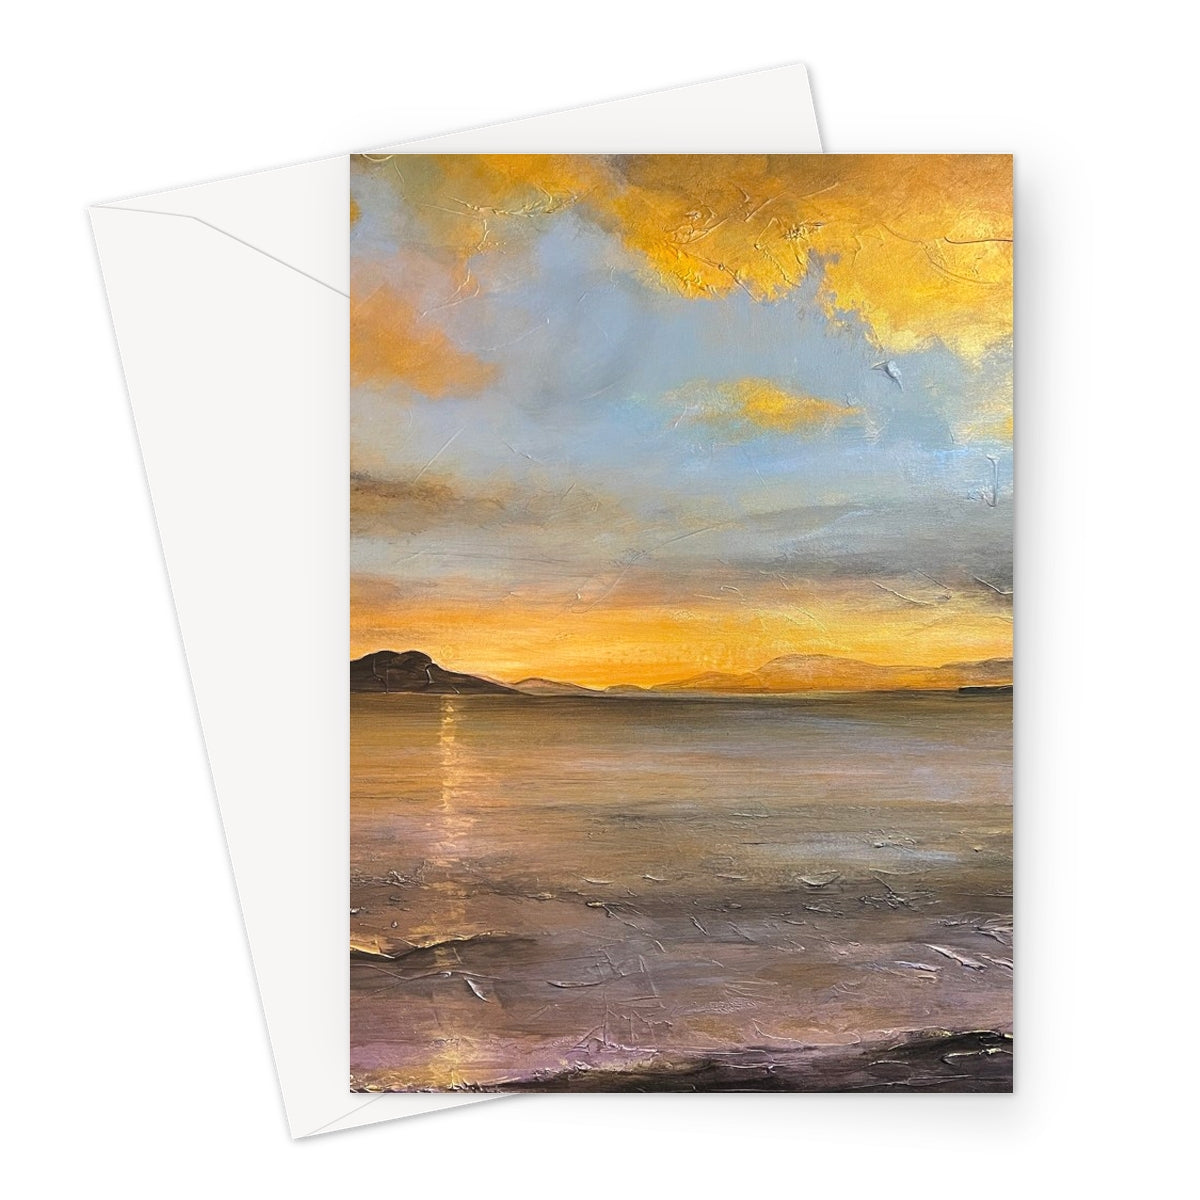 Loch Linnhe Sunset Art Gifts Greeting Card-Stationery-Scottish Lochs & Mountains Art Gallery-A5 Portrait-1 Card-Paintings, Prints, Homeware, Art Gifts From Scotland By Scottish Artist Kevin Hunter